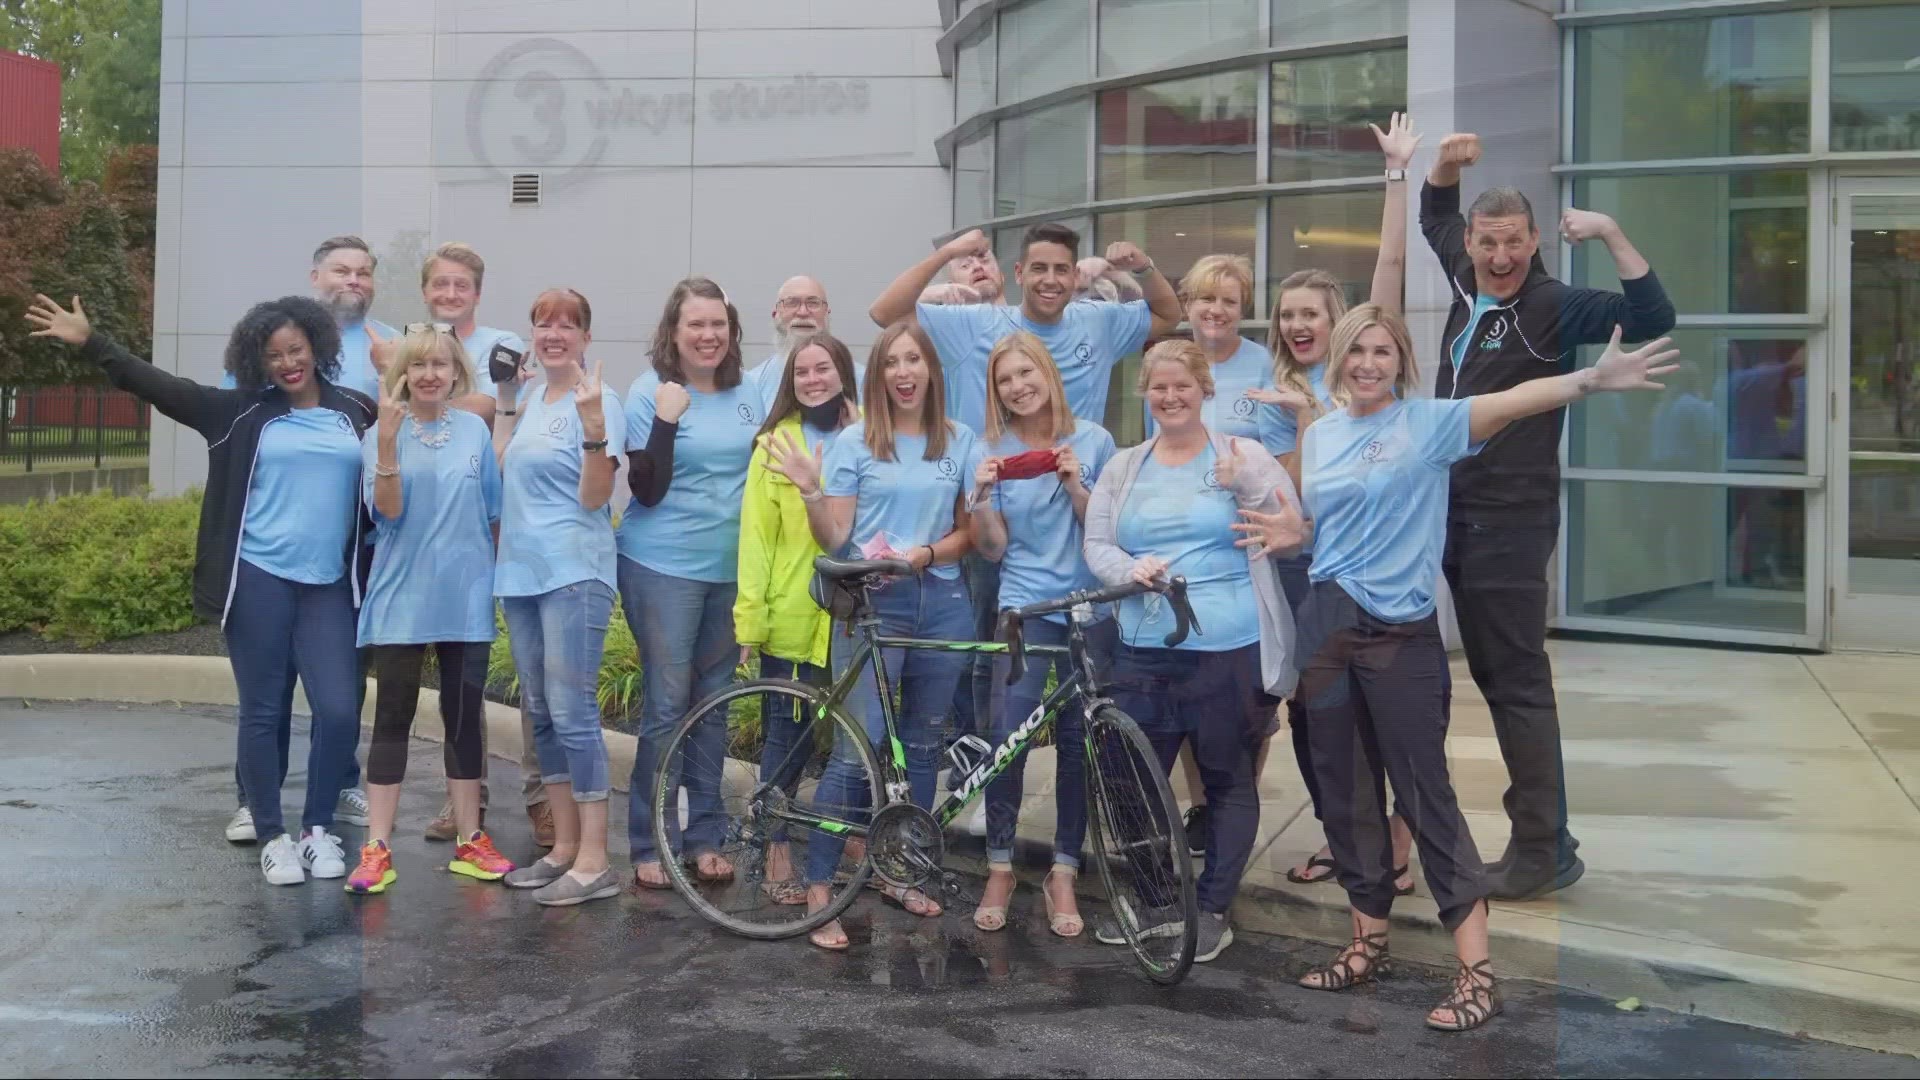 According to a release, $37 million has been raised for VeloSano since the event's inception in 2014.